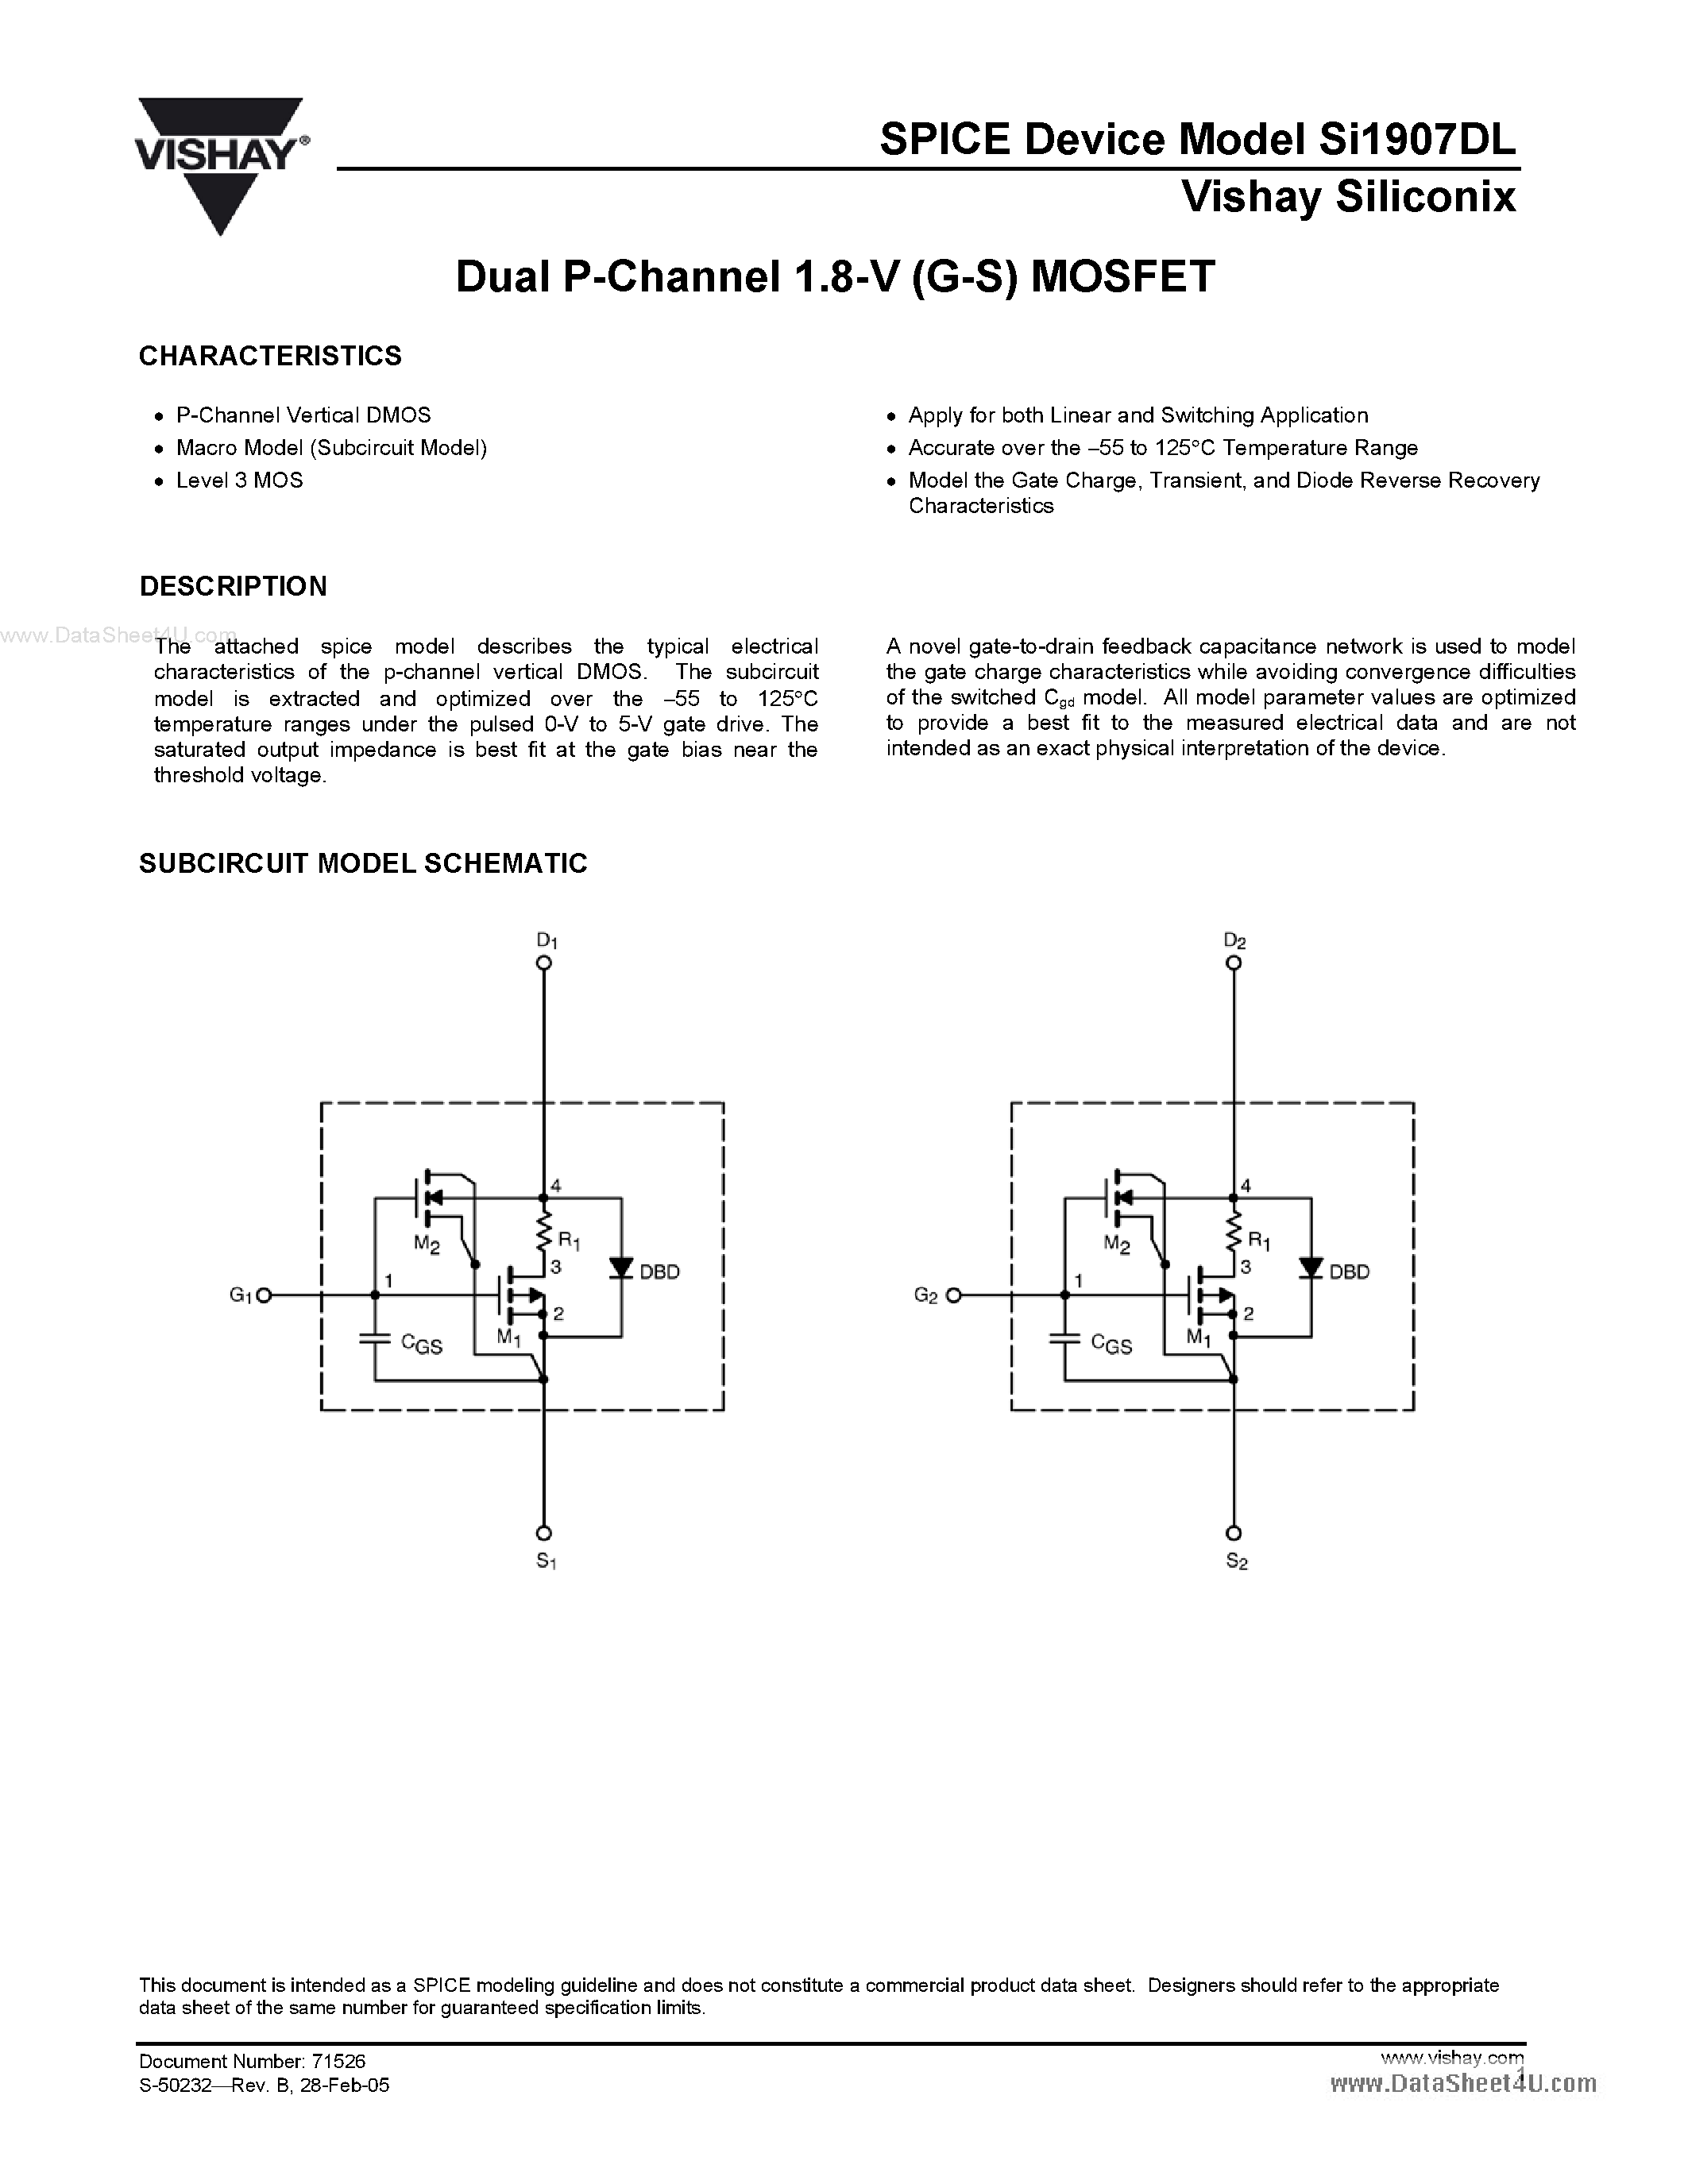 Datasheet SI1907DL - Dual P-Channel 1.8-V (G-S) MOSFET page 1